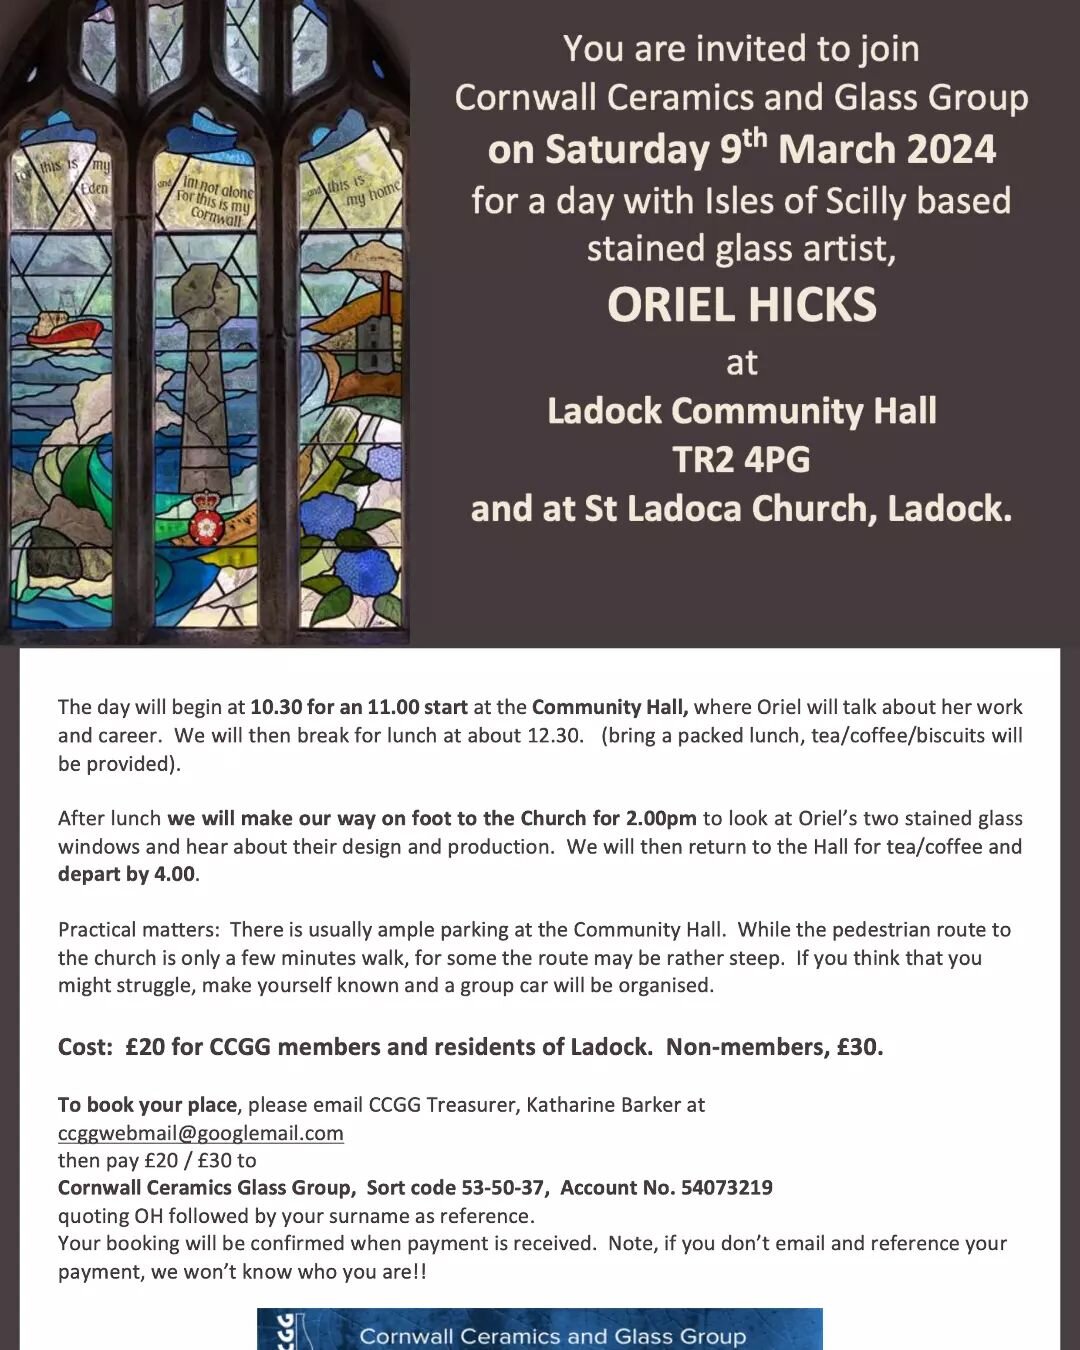 To all my friends in #Devon and #Cornwall,  especially those interested in #stainedglass #churcharchitecture , you are invited to join Cornwall Ceramics and Glass Group in Ladock,  Cornwall for a day with Isles of Scilly based stained glass artist, #